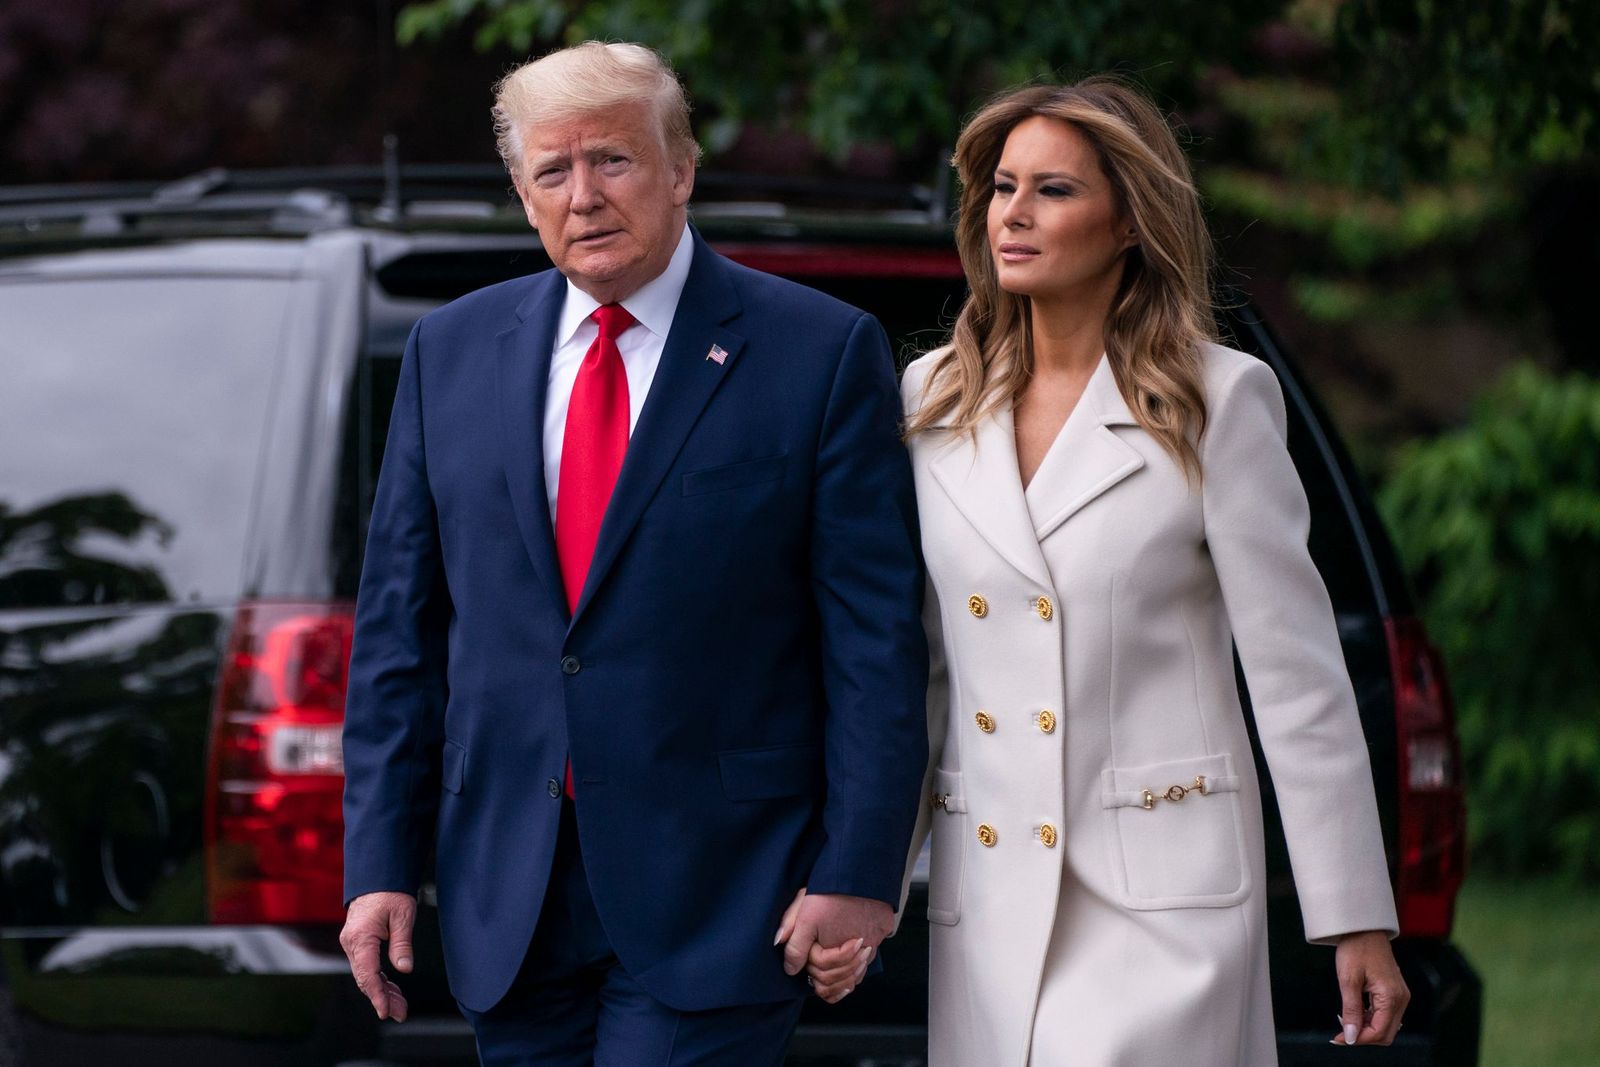 President Donald Trump and first lady Melania Trump leave the White House for Baltimore, Maryland on May 25, 2020 in Washington, DC. | Photo: Sarah Silbiger/Getty Images